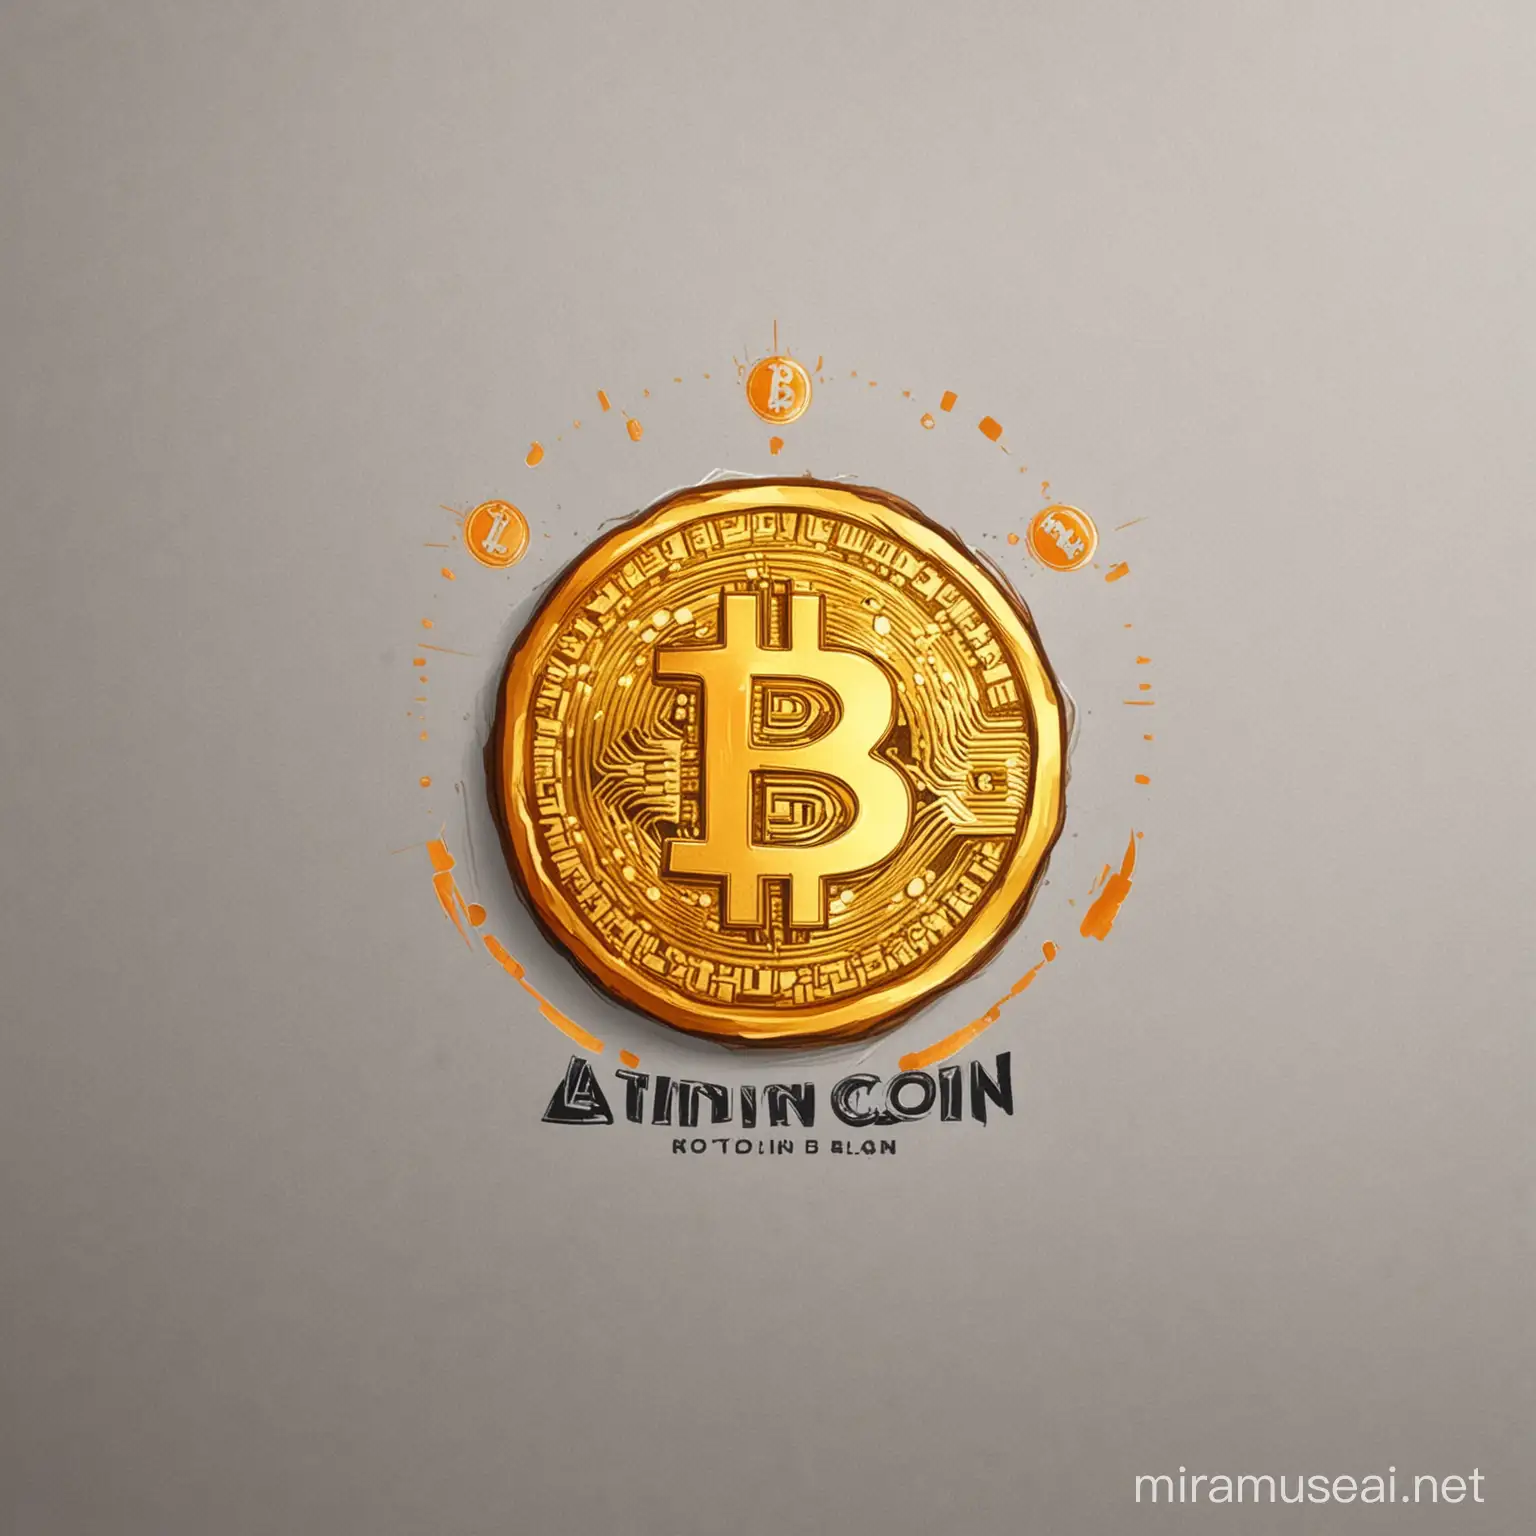 Lng Coin Investment Team Logo Design with Bitcoin Theme